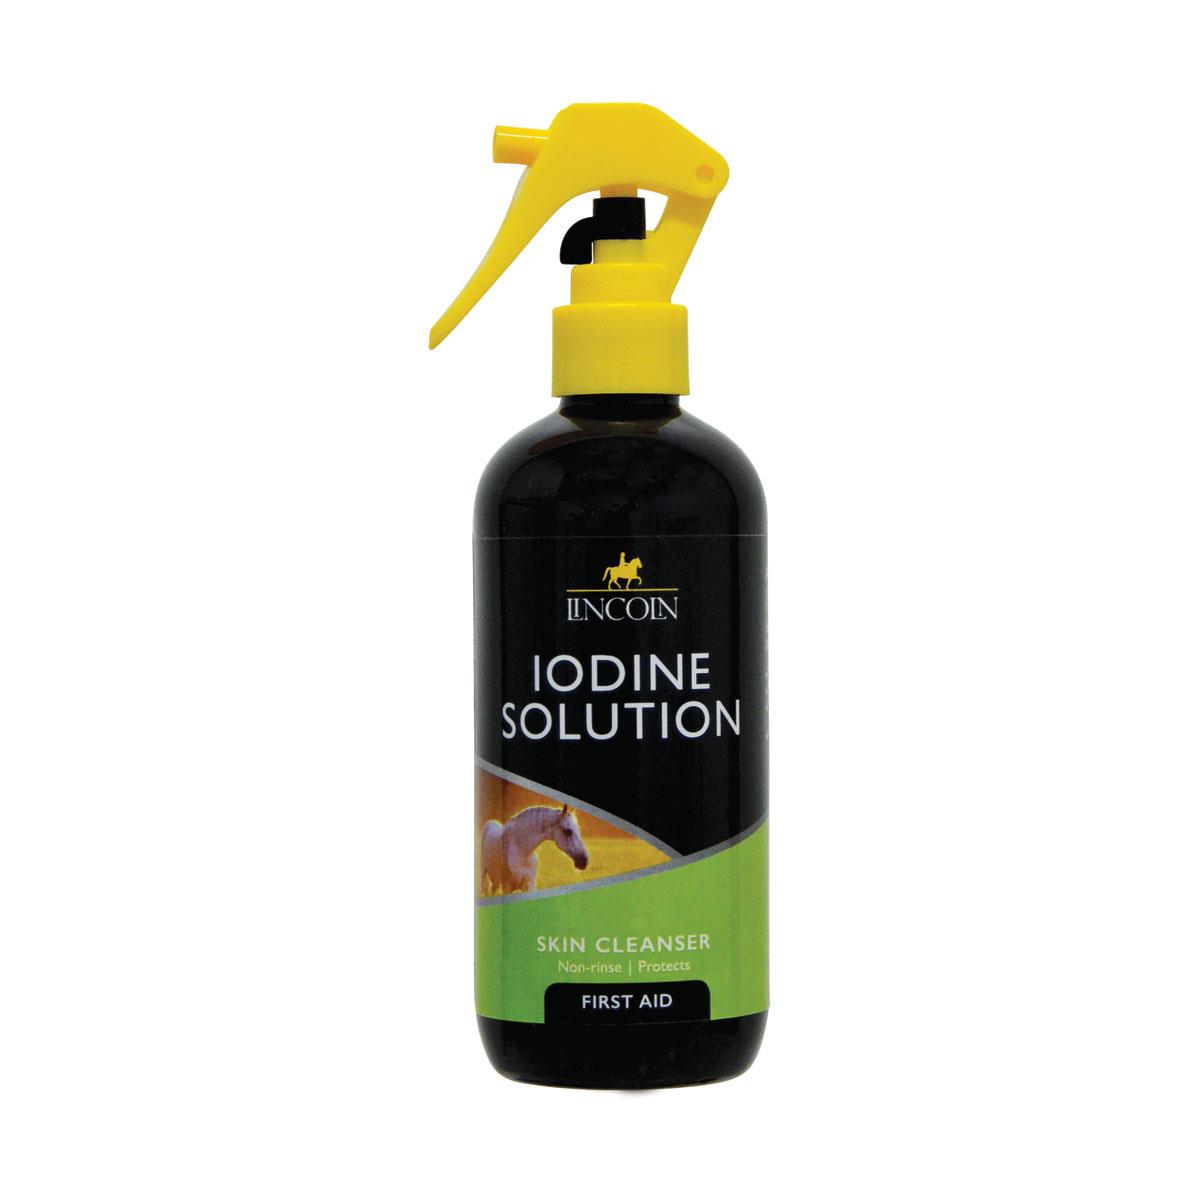 Lincoln Iodine Solution - A versatile skin cleanser for maintaining the health and cleanliness of your horse's skin, in an easy-to-apply spray pack.